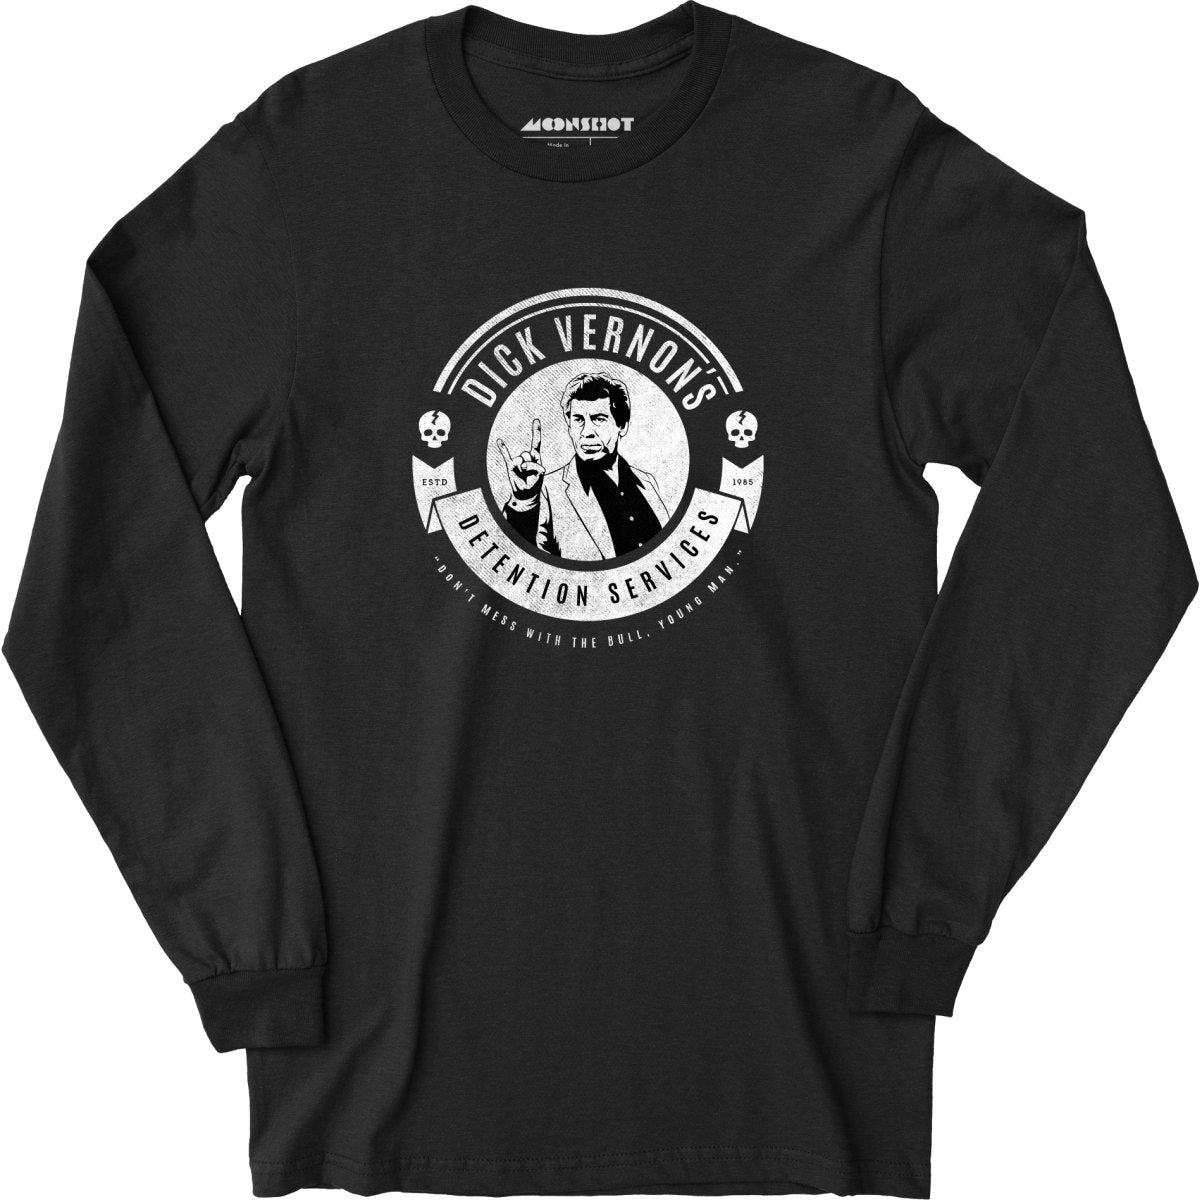 Dick Vernon's Detention Services - Long Sleeve T-Shirt